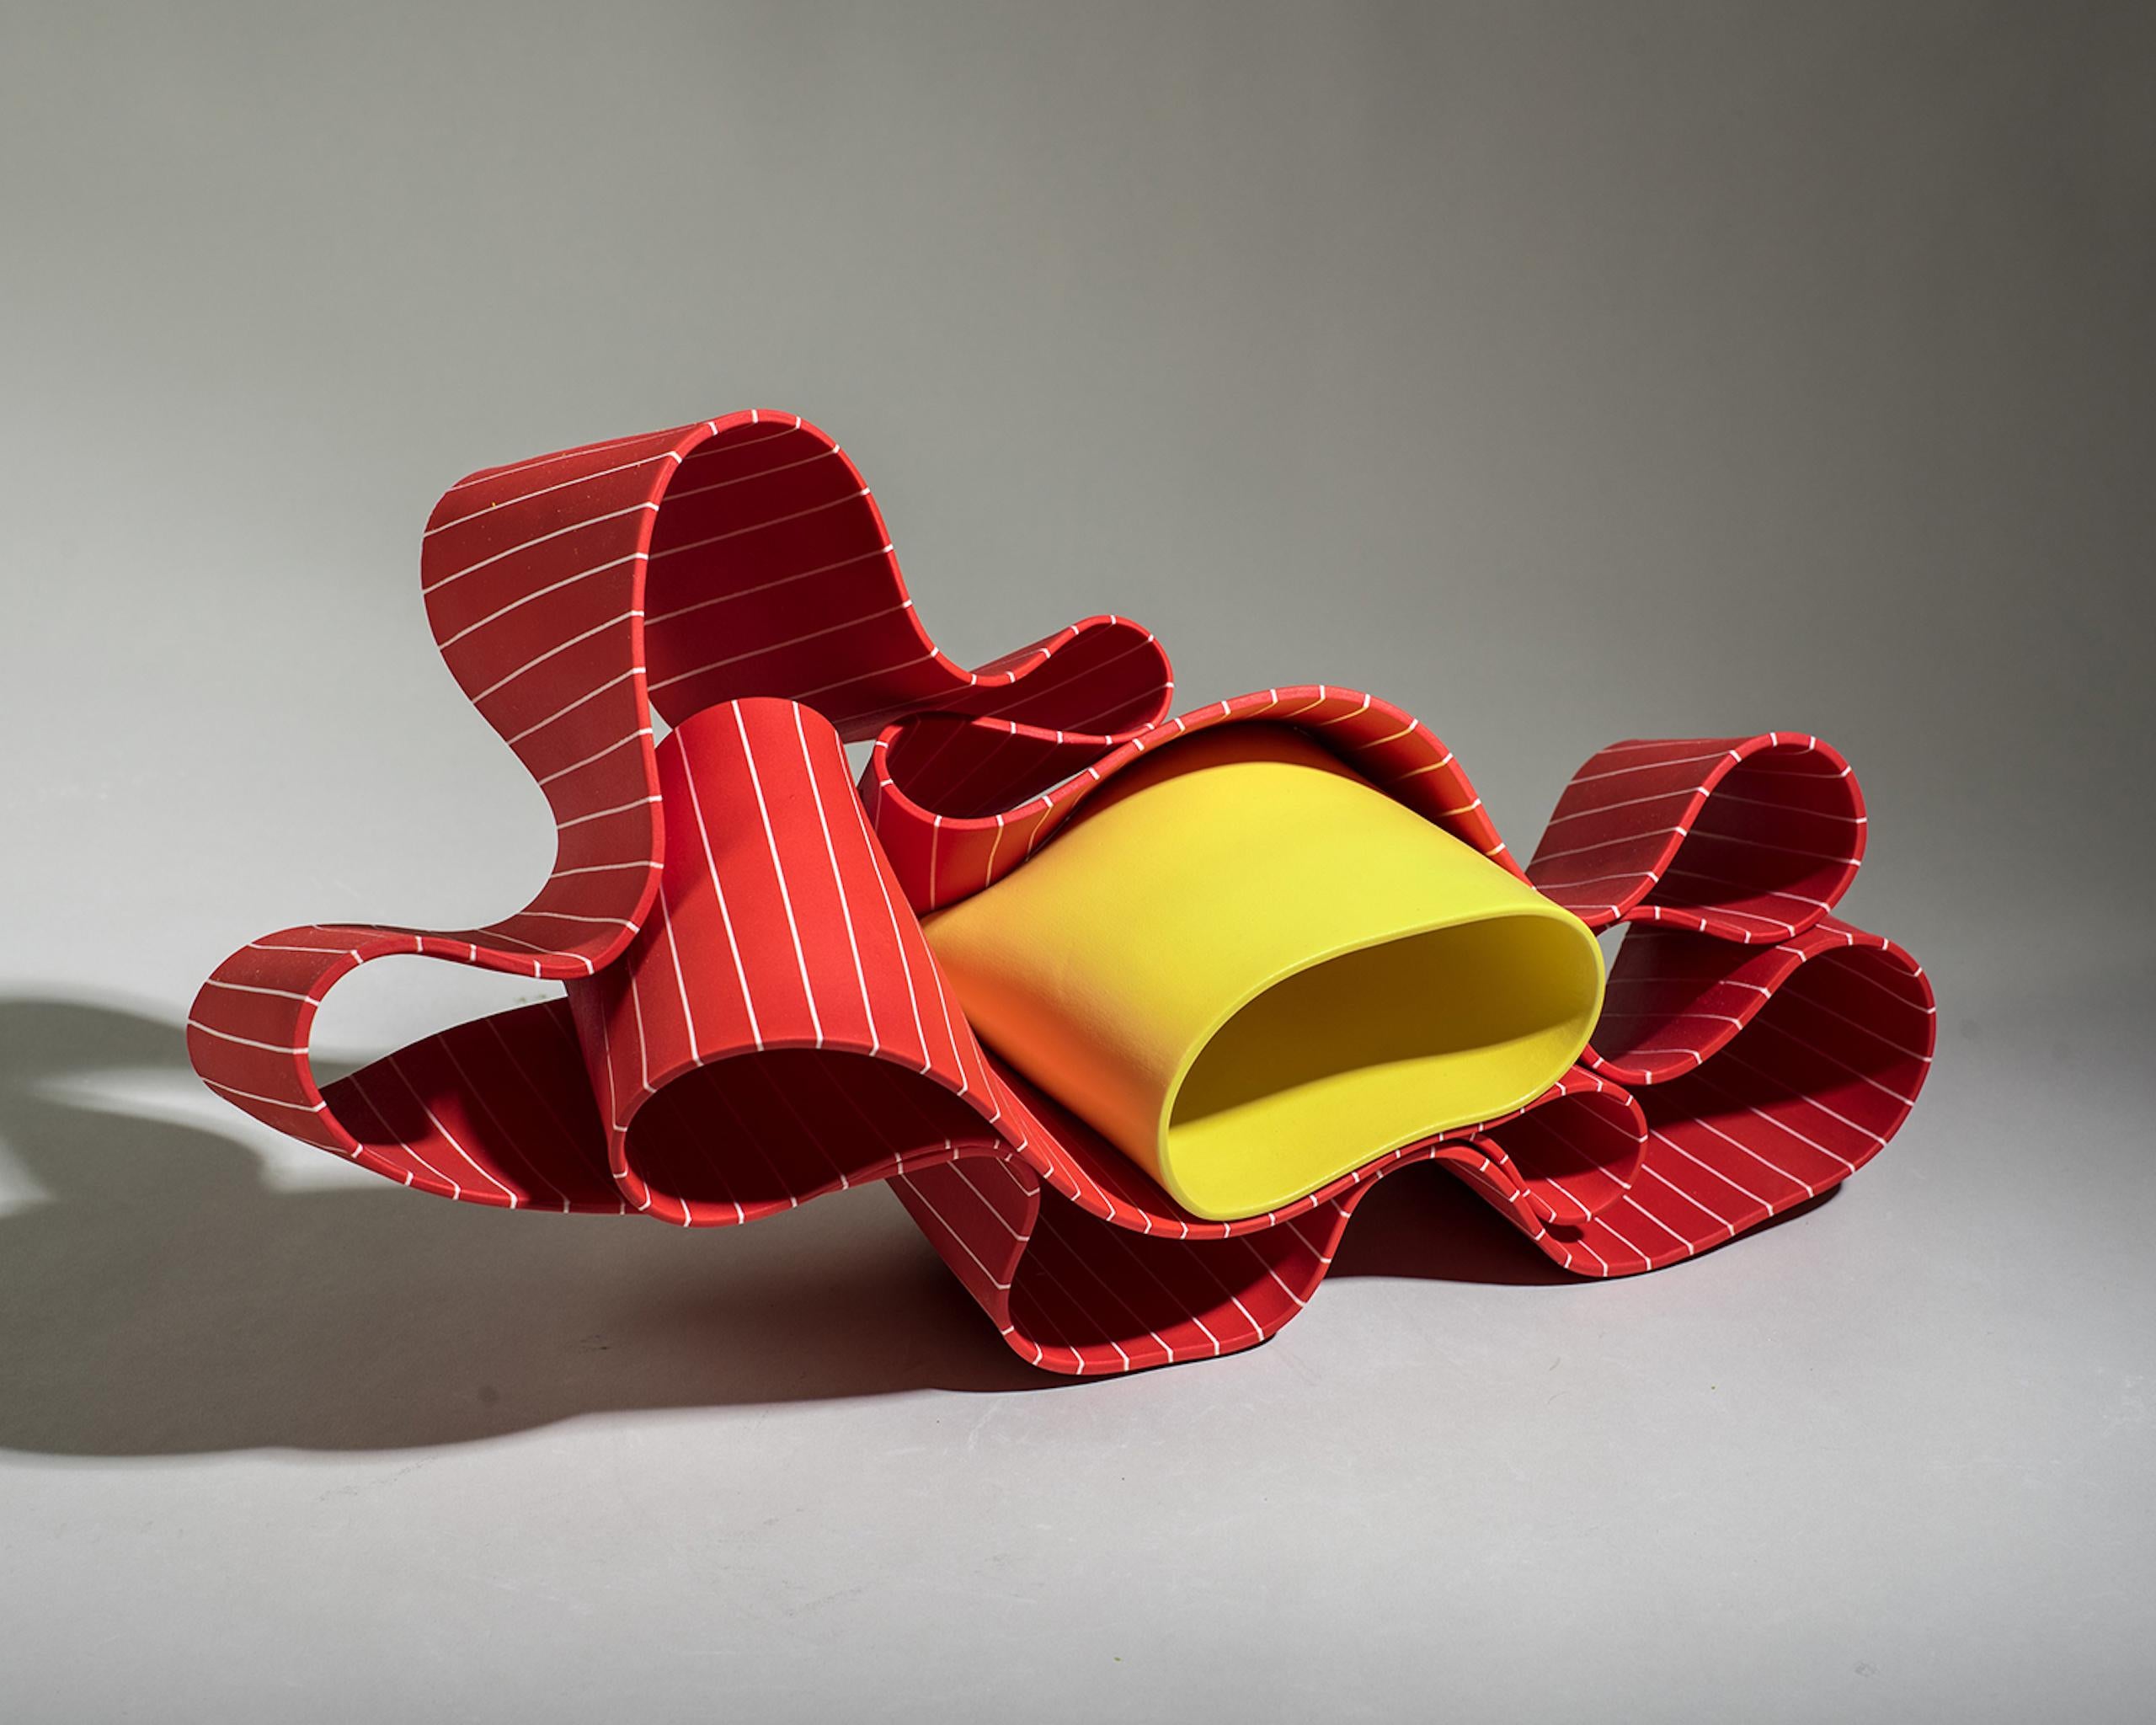 This sculpture was awarded the Mention Jury Award during the 2022 international competition of the Ceramic Art Andenne (CAA) in Belgium.
Folding in Motion 1 is part of the sculptor’s most recent work, in which she uses paper porcelain (porcelain